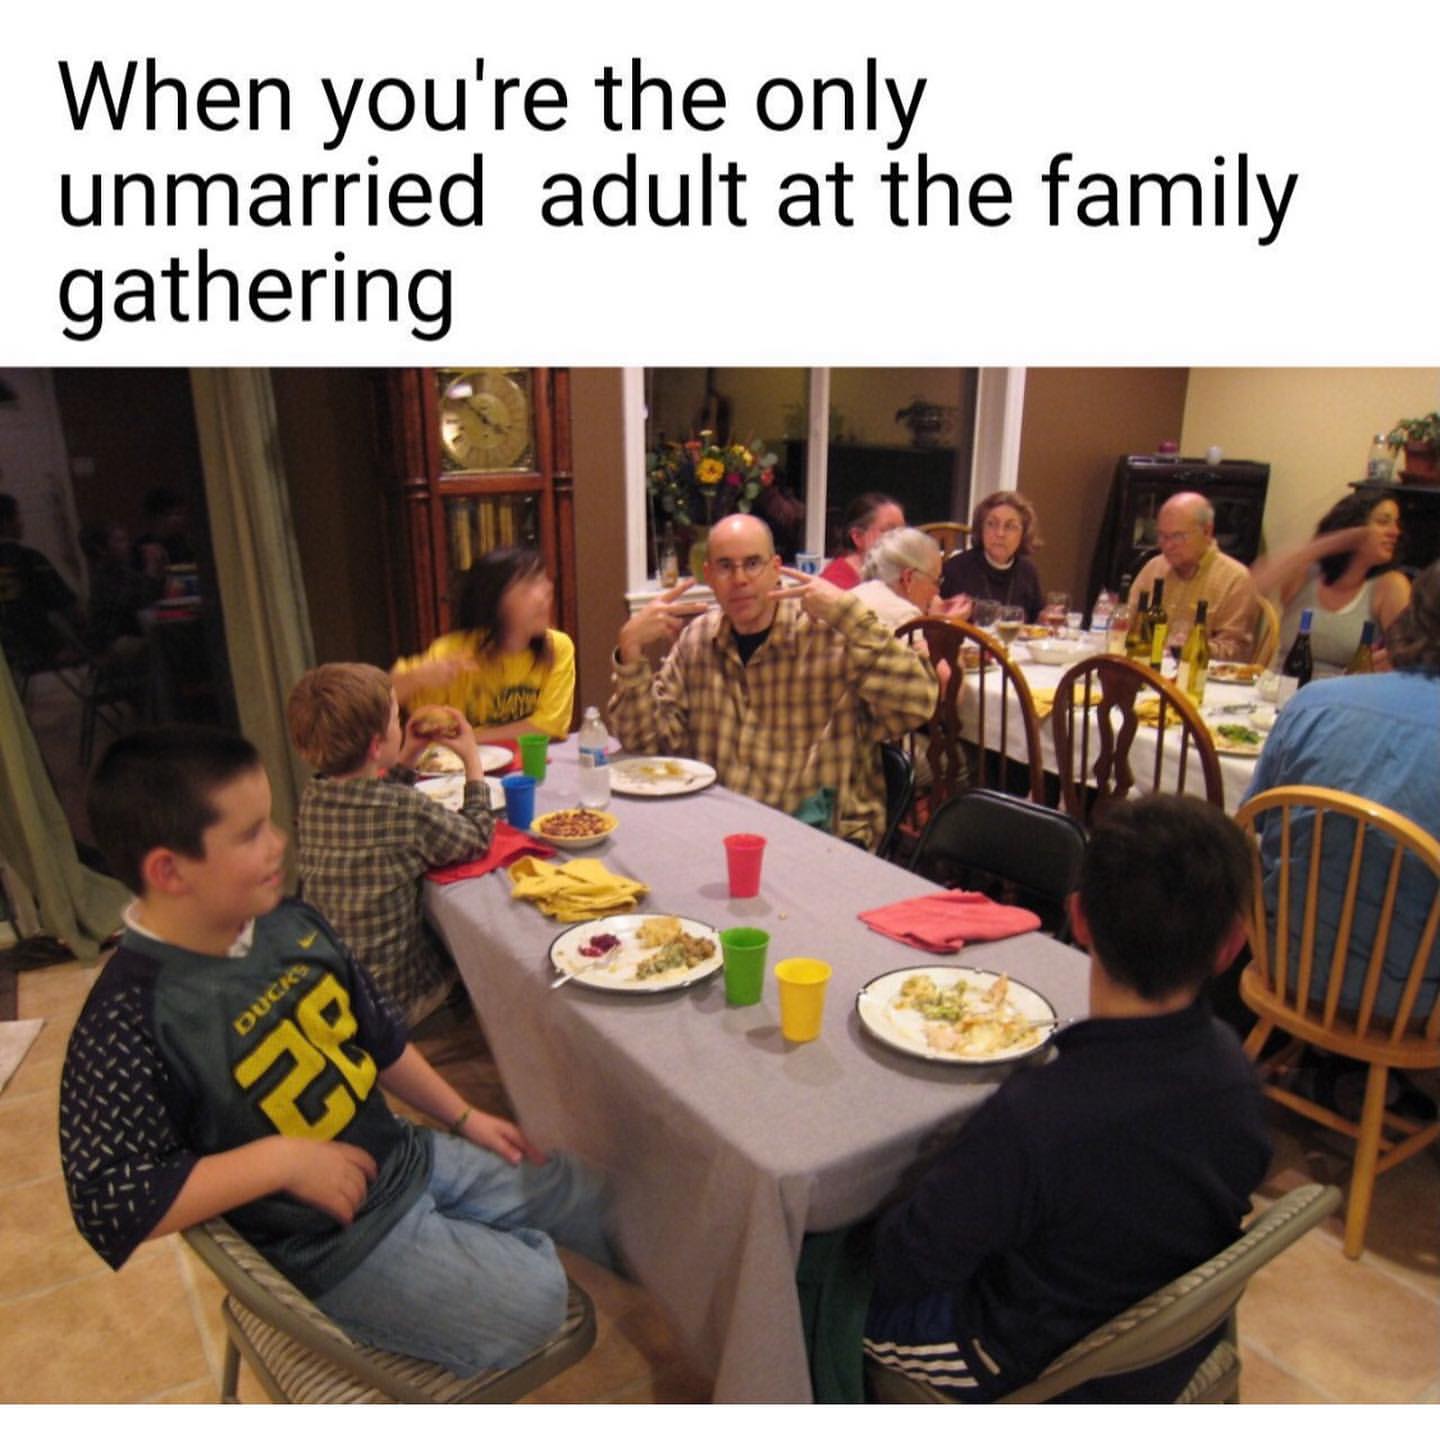 When you're the only unmarried adult at the family gathering.